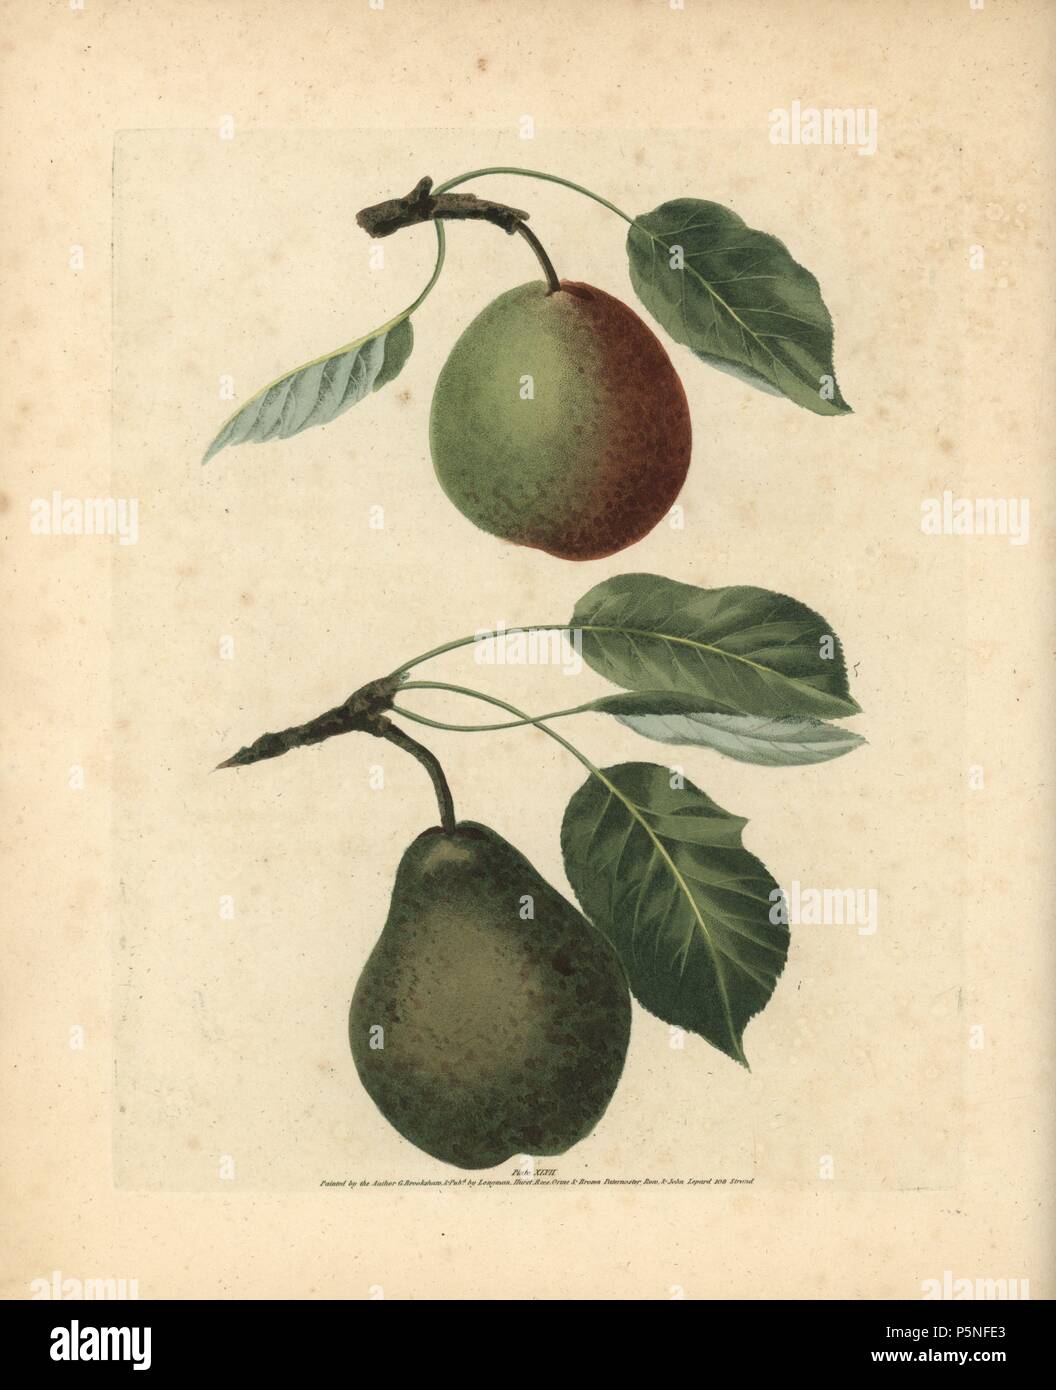 Pear varieties, Pyrus communis: Winter Swan's Egg and Easter Bergamot. Handcoloured stipple engraving of an illustration by George Brookshaw from his own 'Pomona Britannica,' London, Longman, Hurst, etc., 1817. The quarto edition of the original folio edition published from 1804-1812. Brookshaw (1751-1823) was a successful cabinet maker who disappeared in the 1790s before returning as a flower painter with the anonymous 'New Treatise on Flower Painting,' 1797. Stock Photo